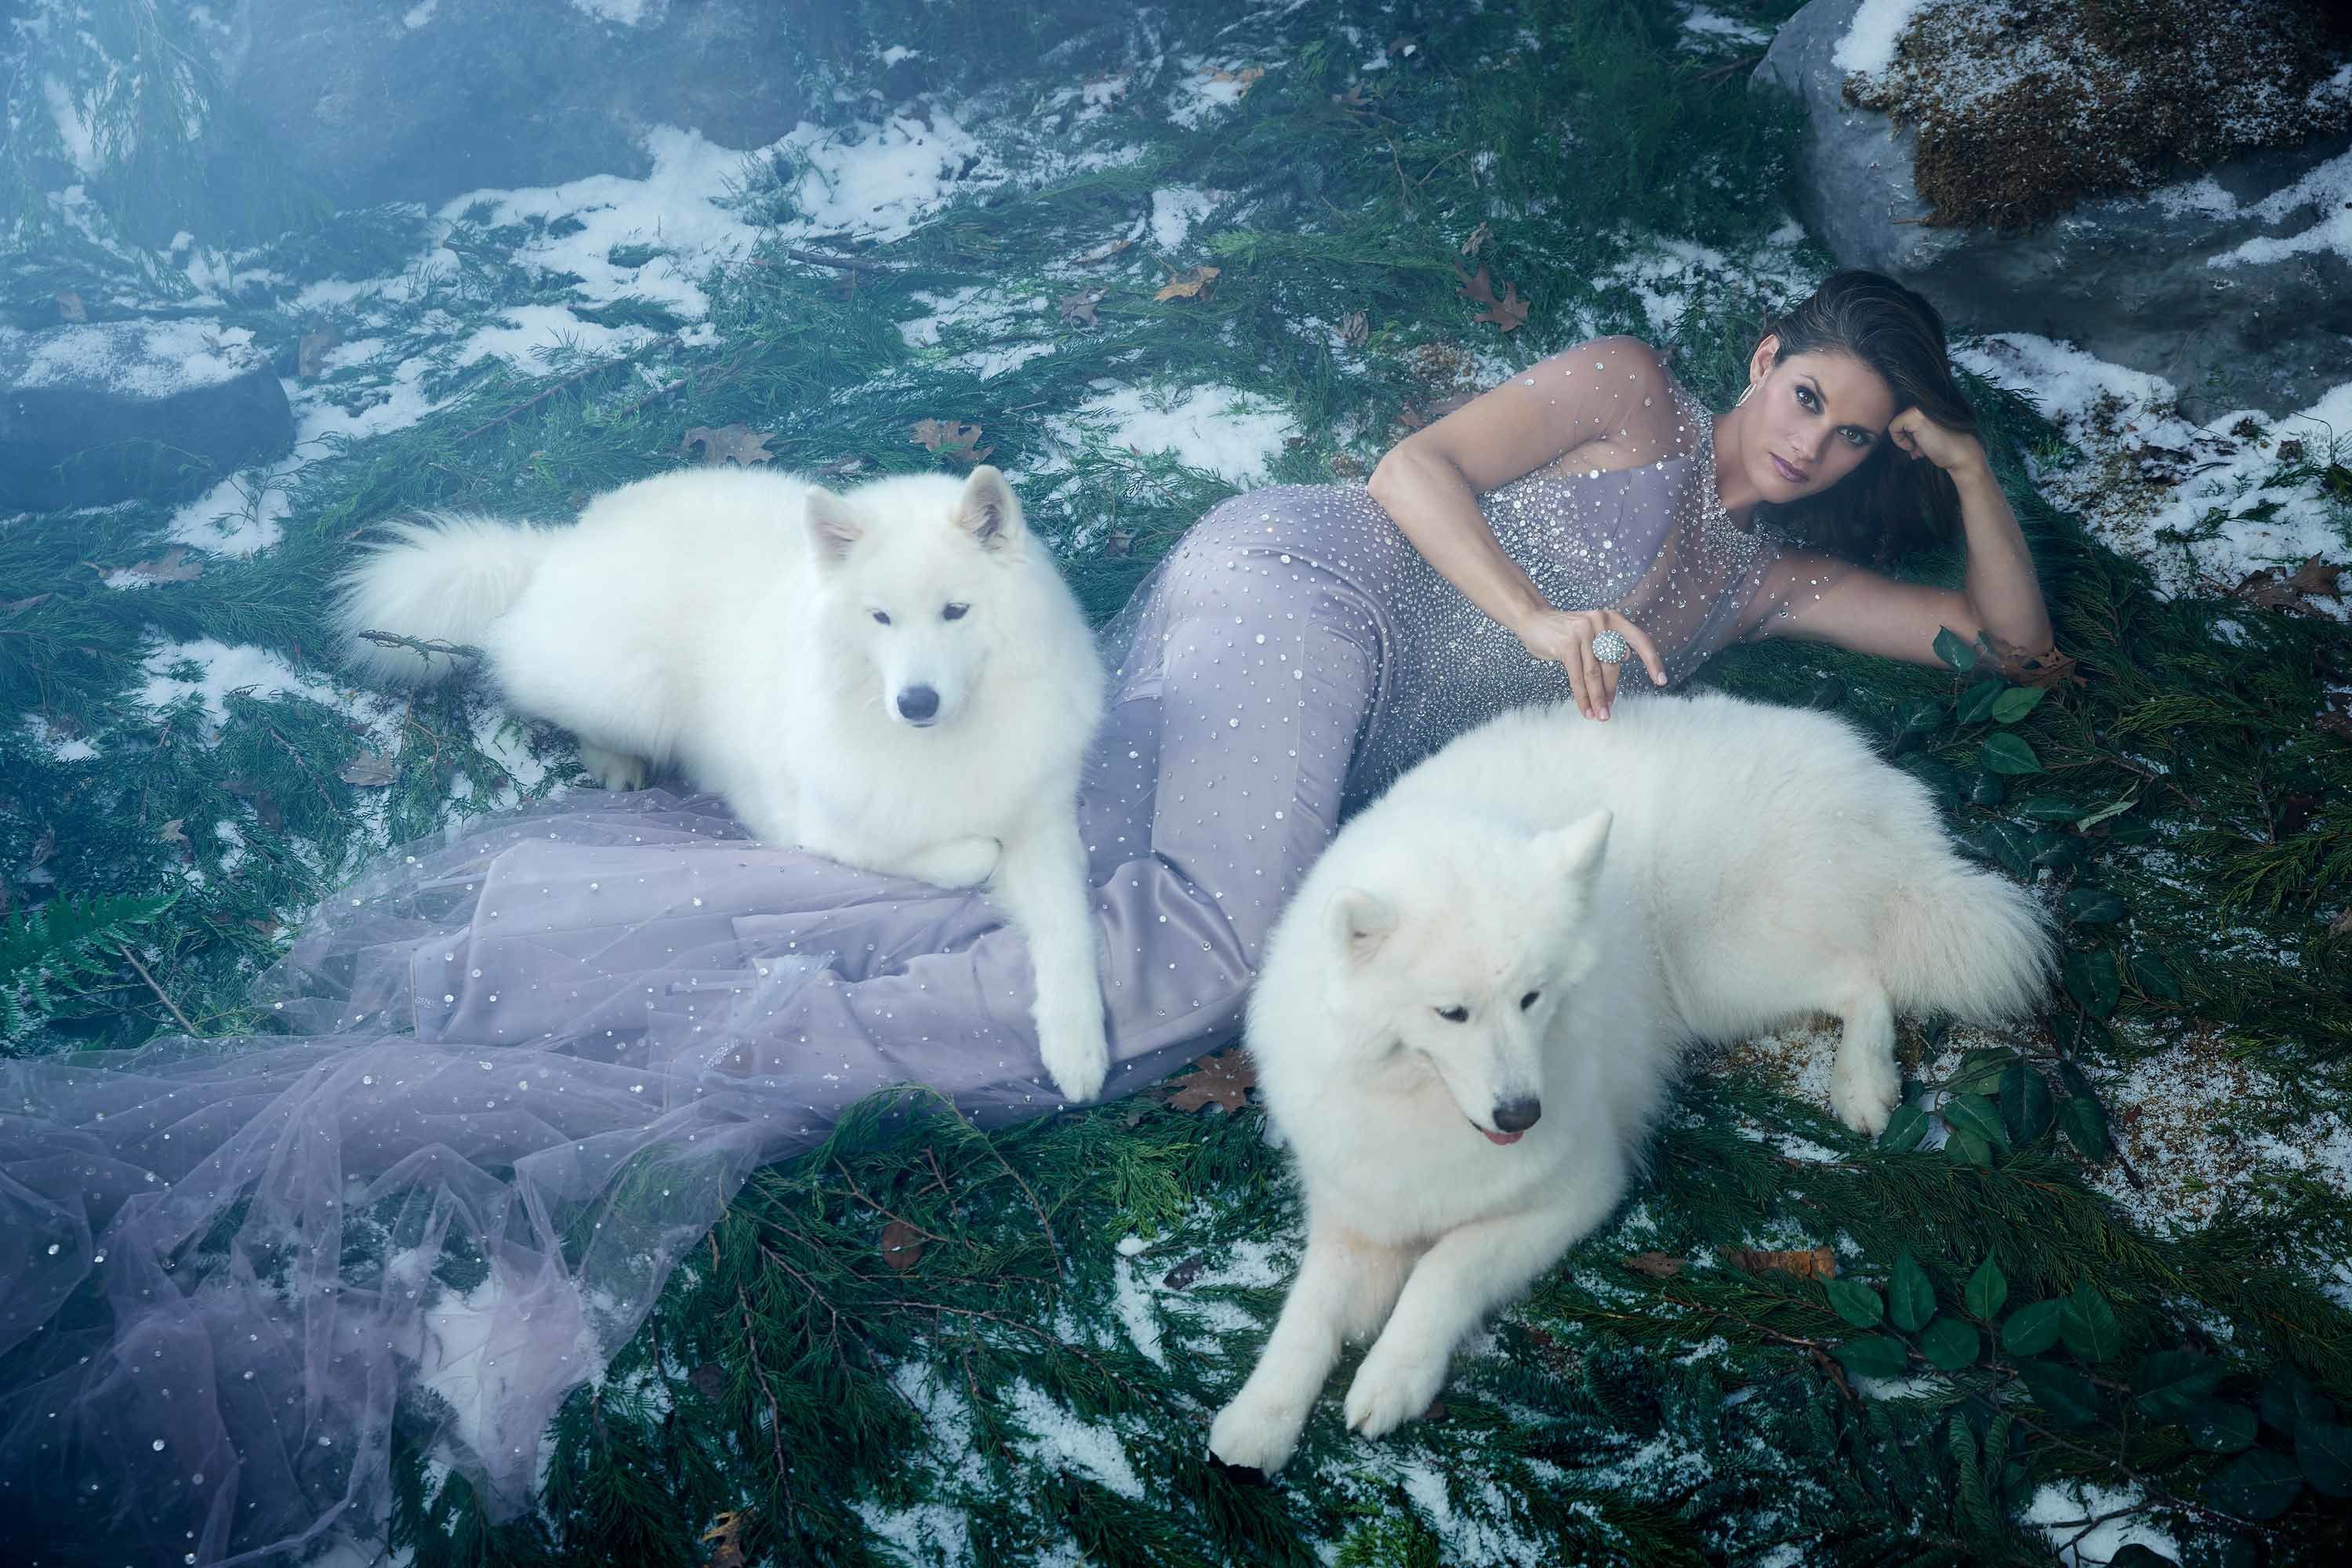 Actress Missy Peregrym of the show FBI wears a sheer and flowing dress while reclining on the ground with two white dogs.